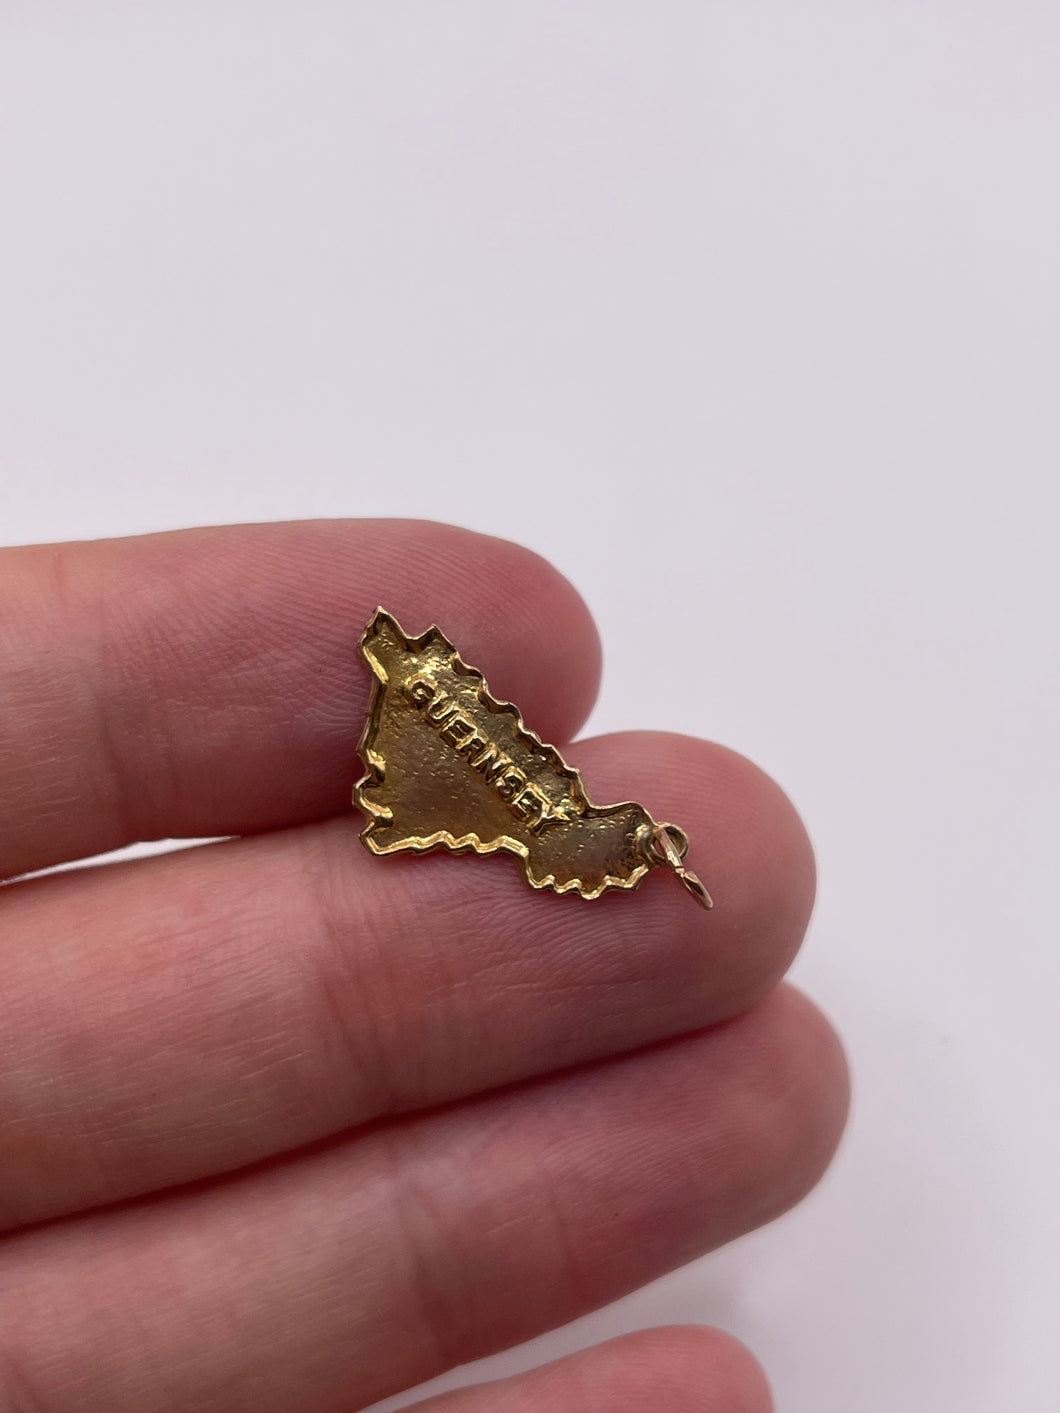 9ct gold Guernsey charm